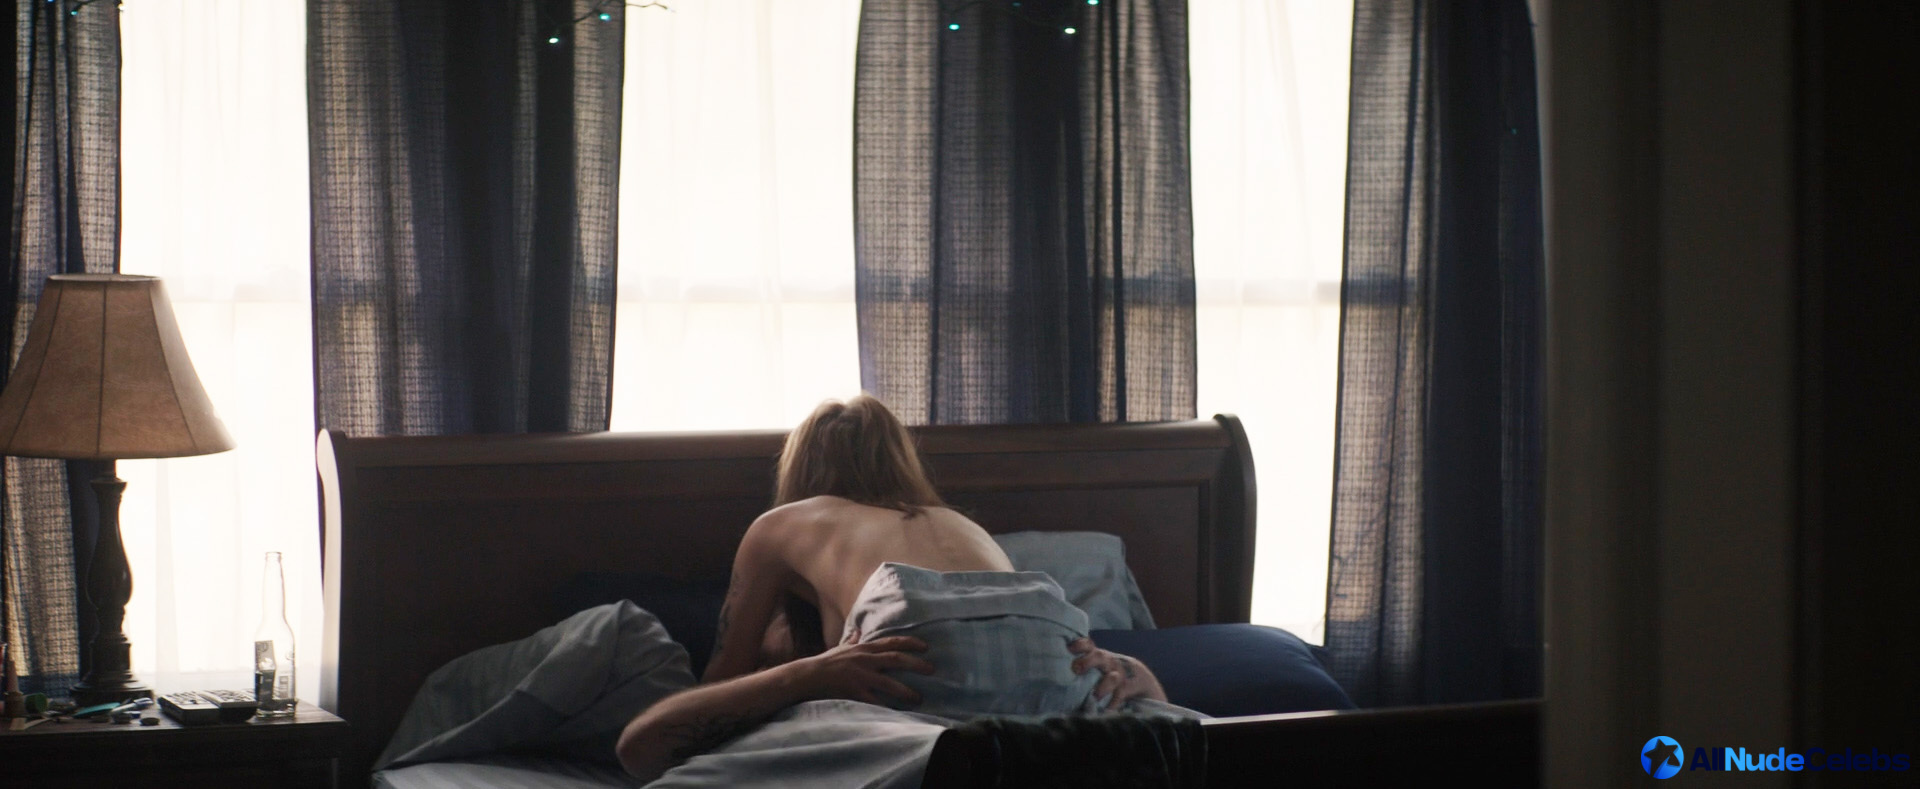 Zoey Deutch naked and sex movie scenes.